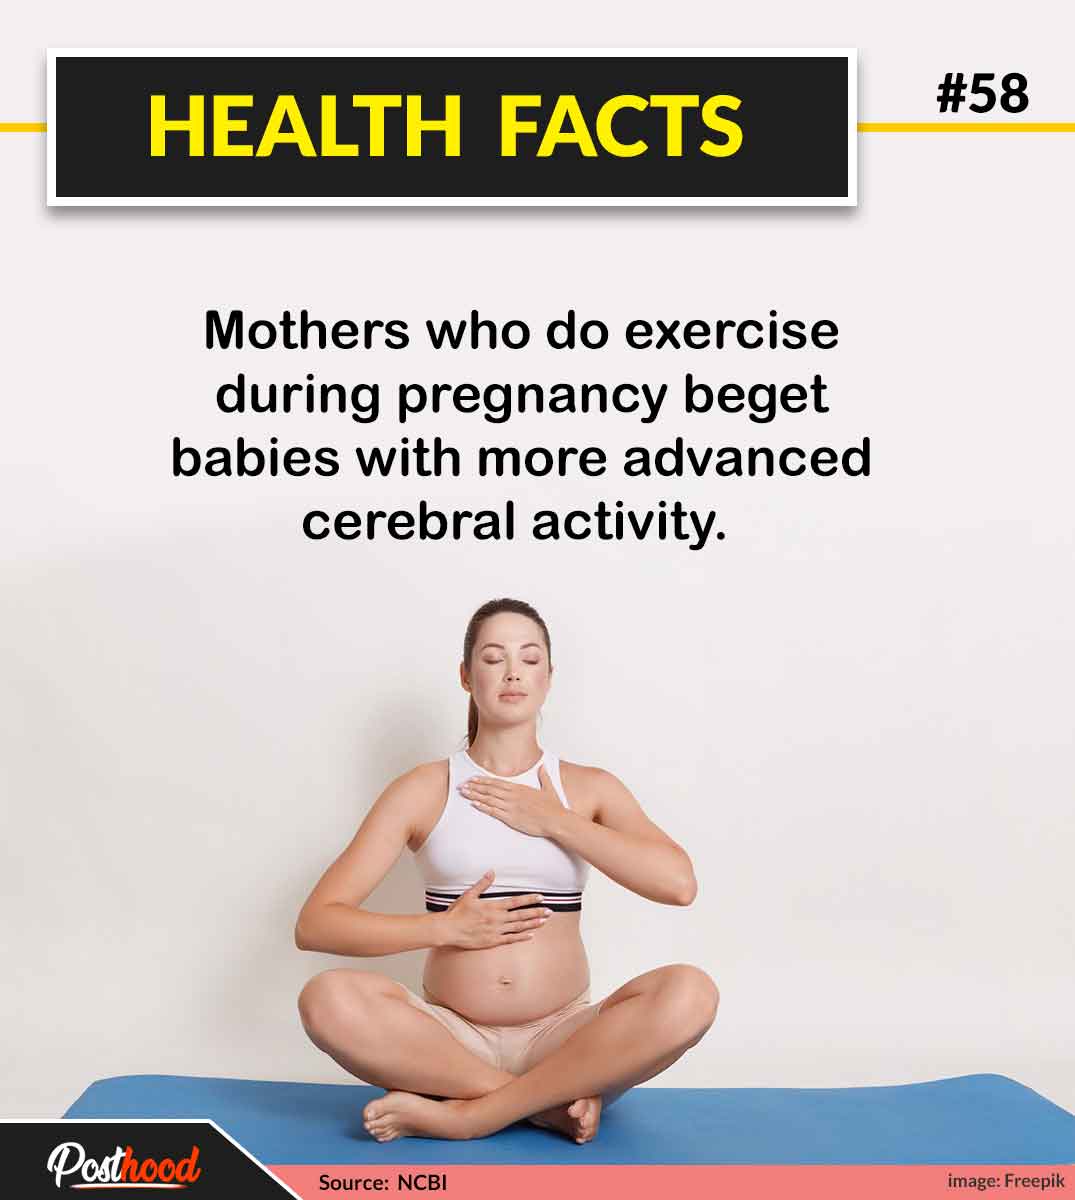 Most amazing health facts for the pregnant woman who want her child to be mentally sharp with improved learning skills. General health facts. 